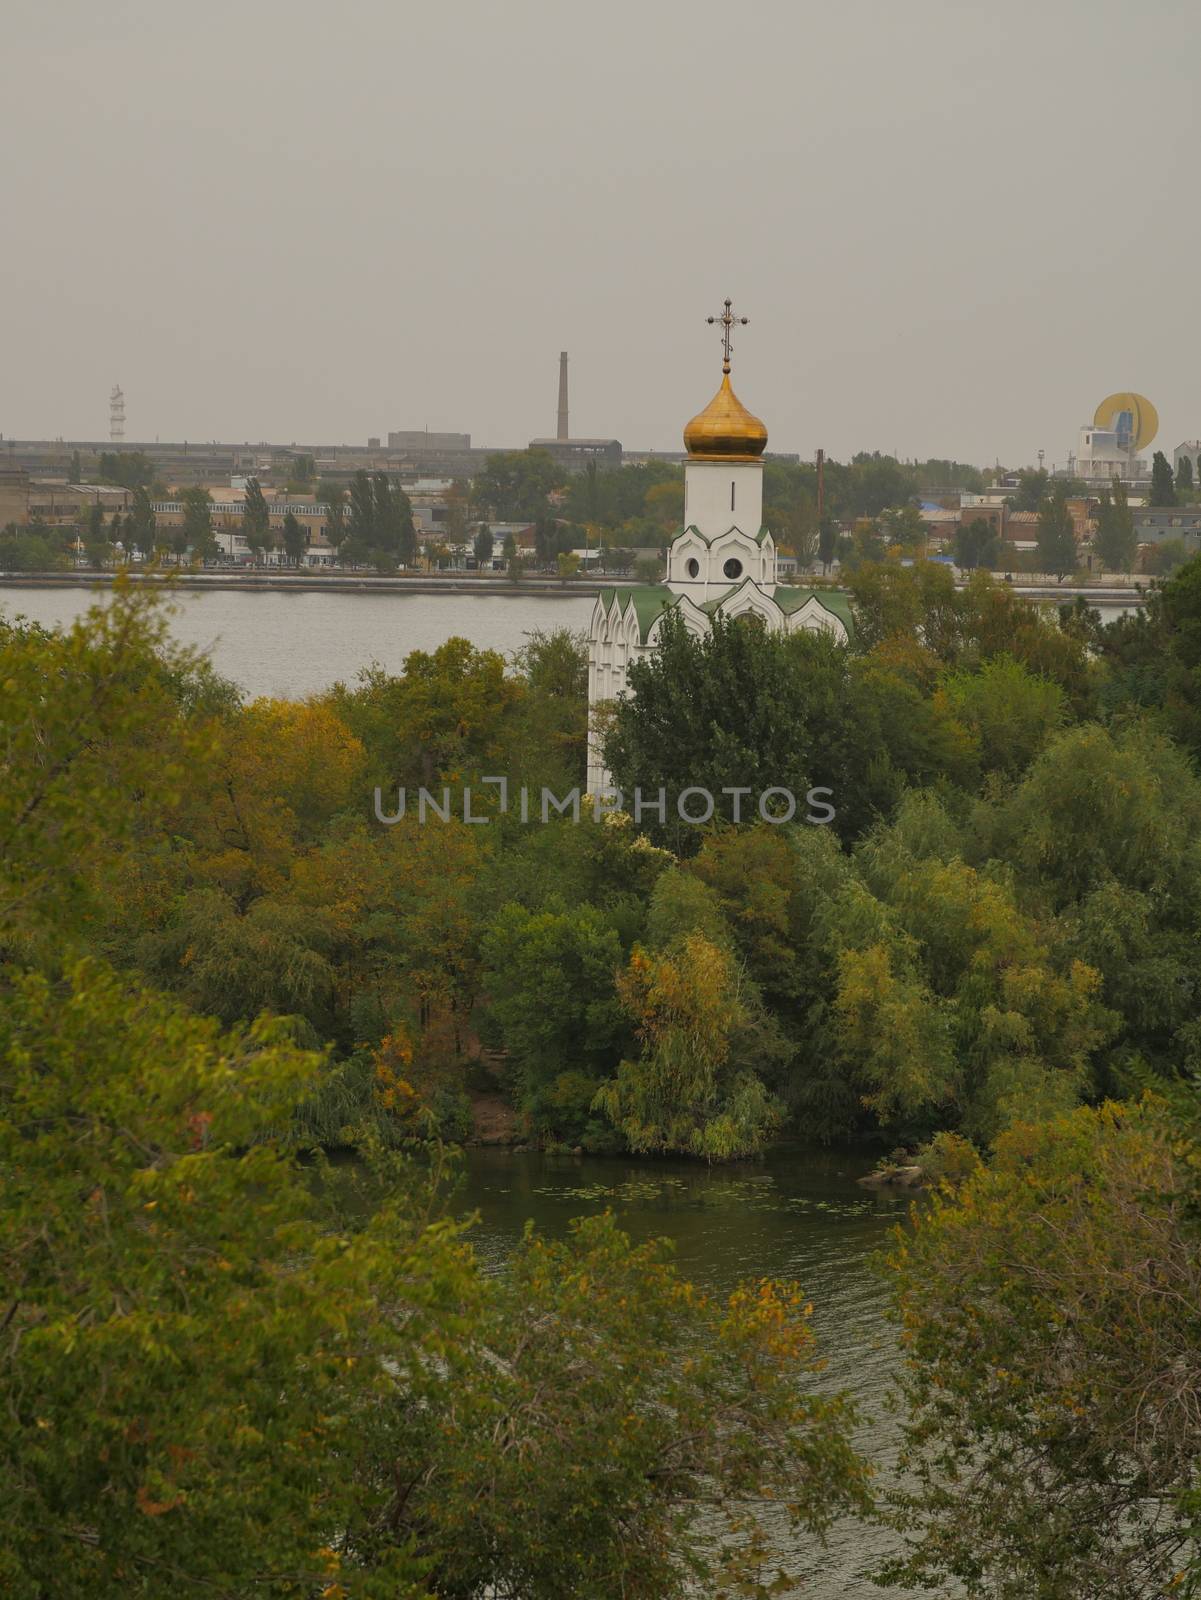 Local park views in Dnipro city, Ukraine by VIIIPhoto